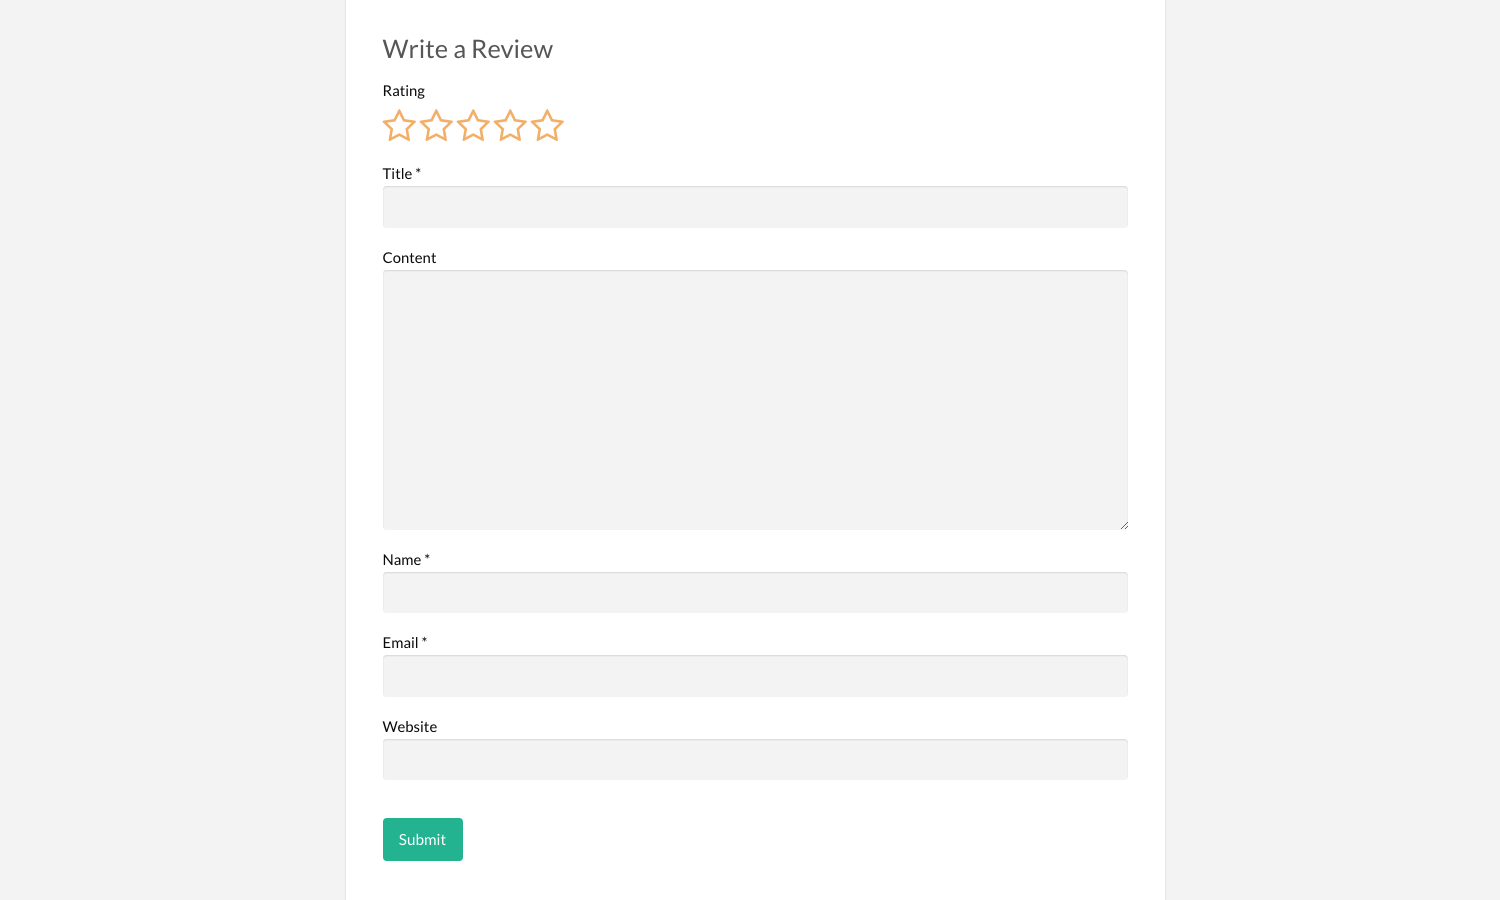 Simple form so your customers or visitors can quickly complete their review.